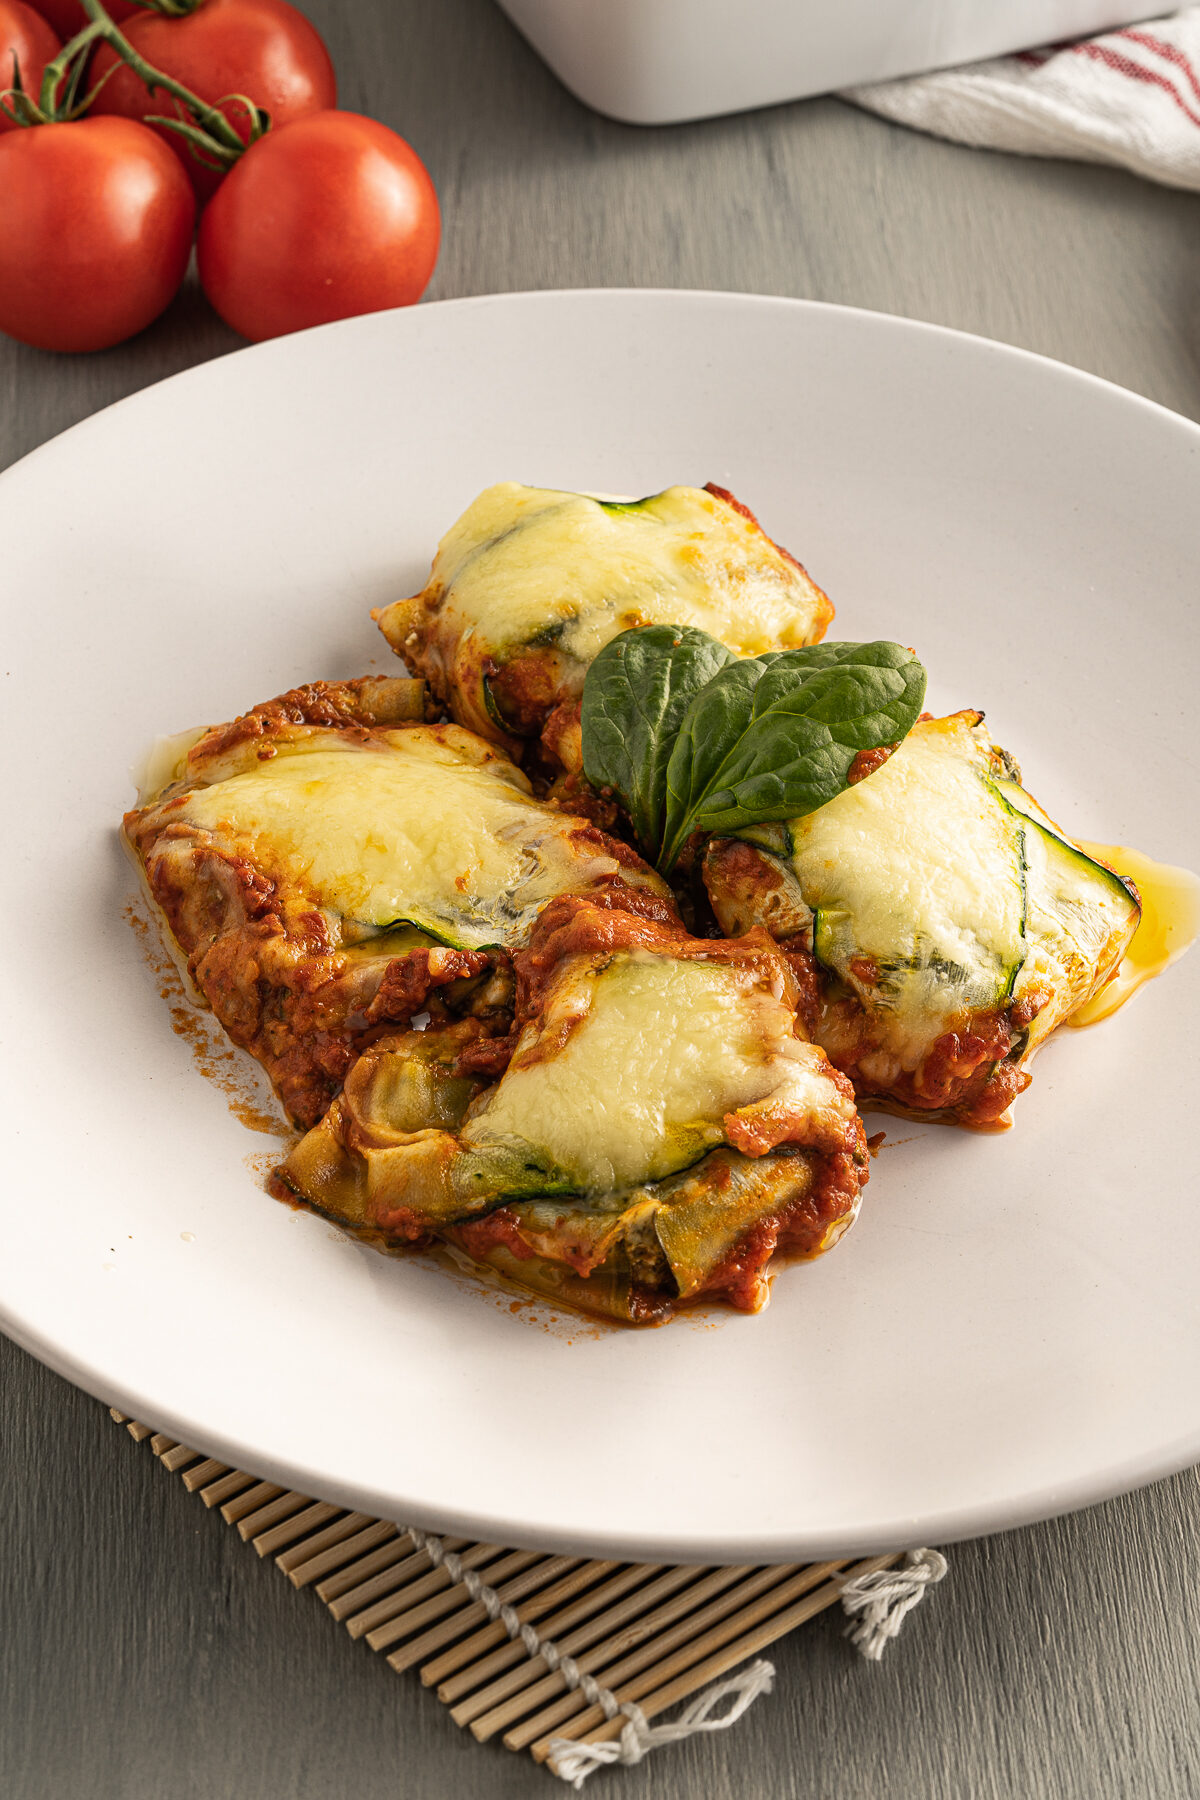 Zucchini ravioli is an easy to make Keto friendly family meal. Filled with cheese and spinach, it's a satisfying & tasty vegetarian dish!